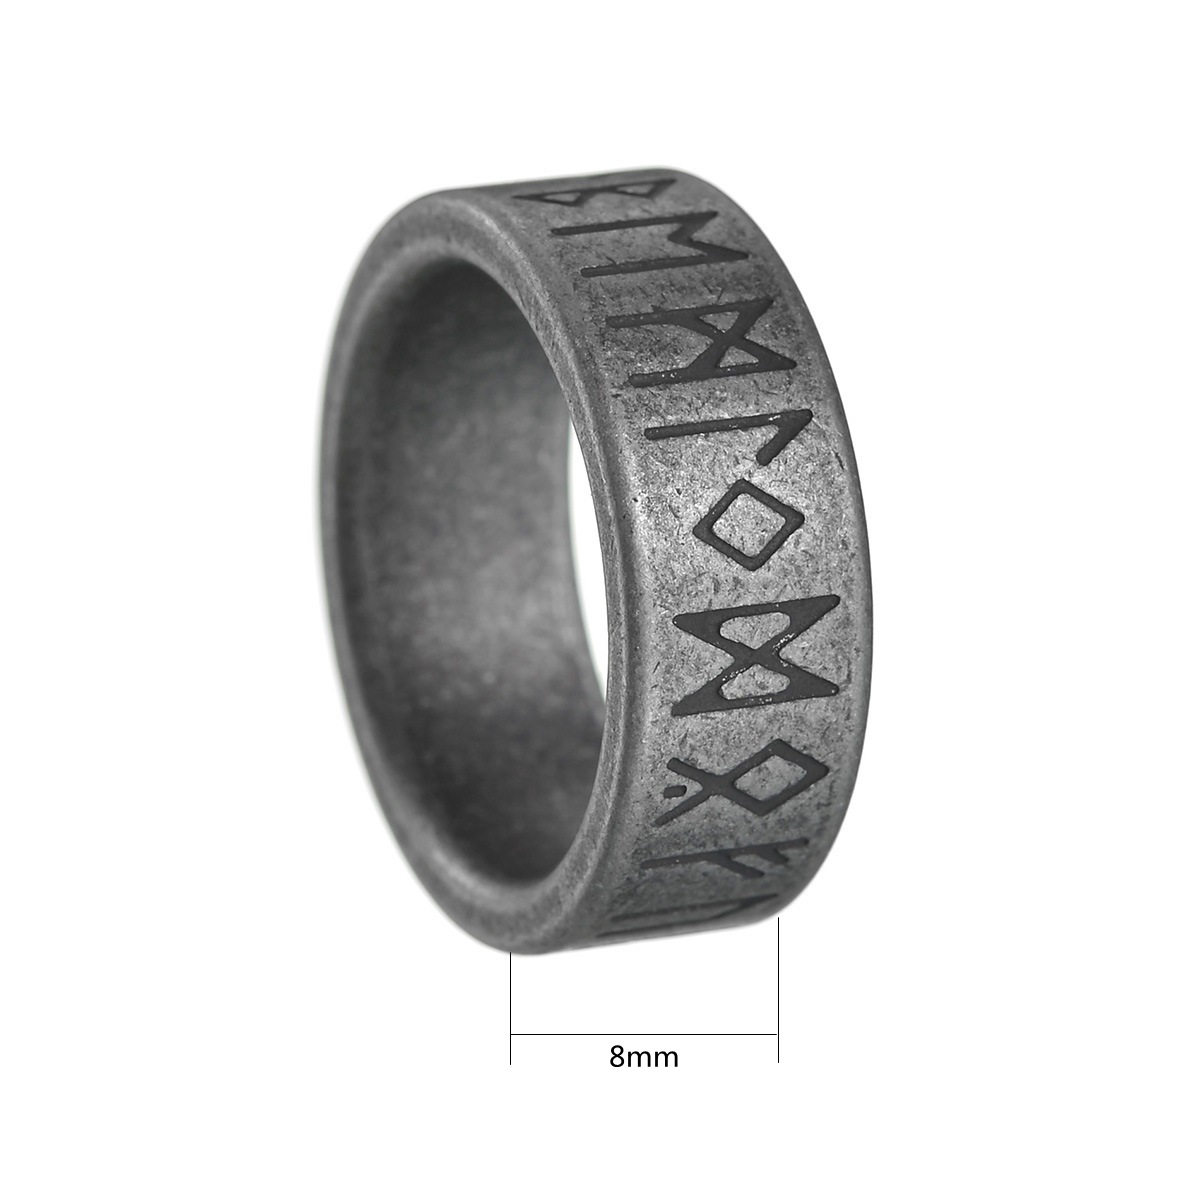 8mm ancient silver rune